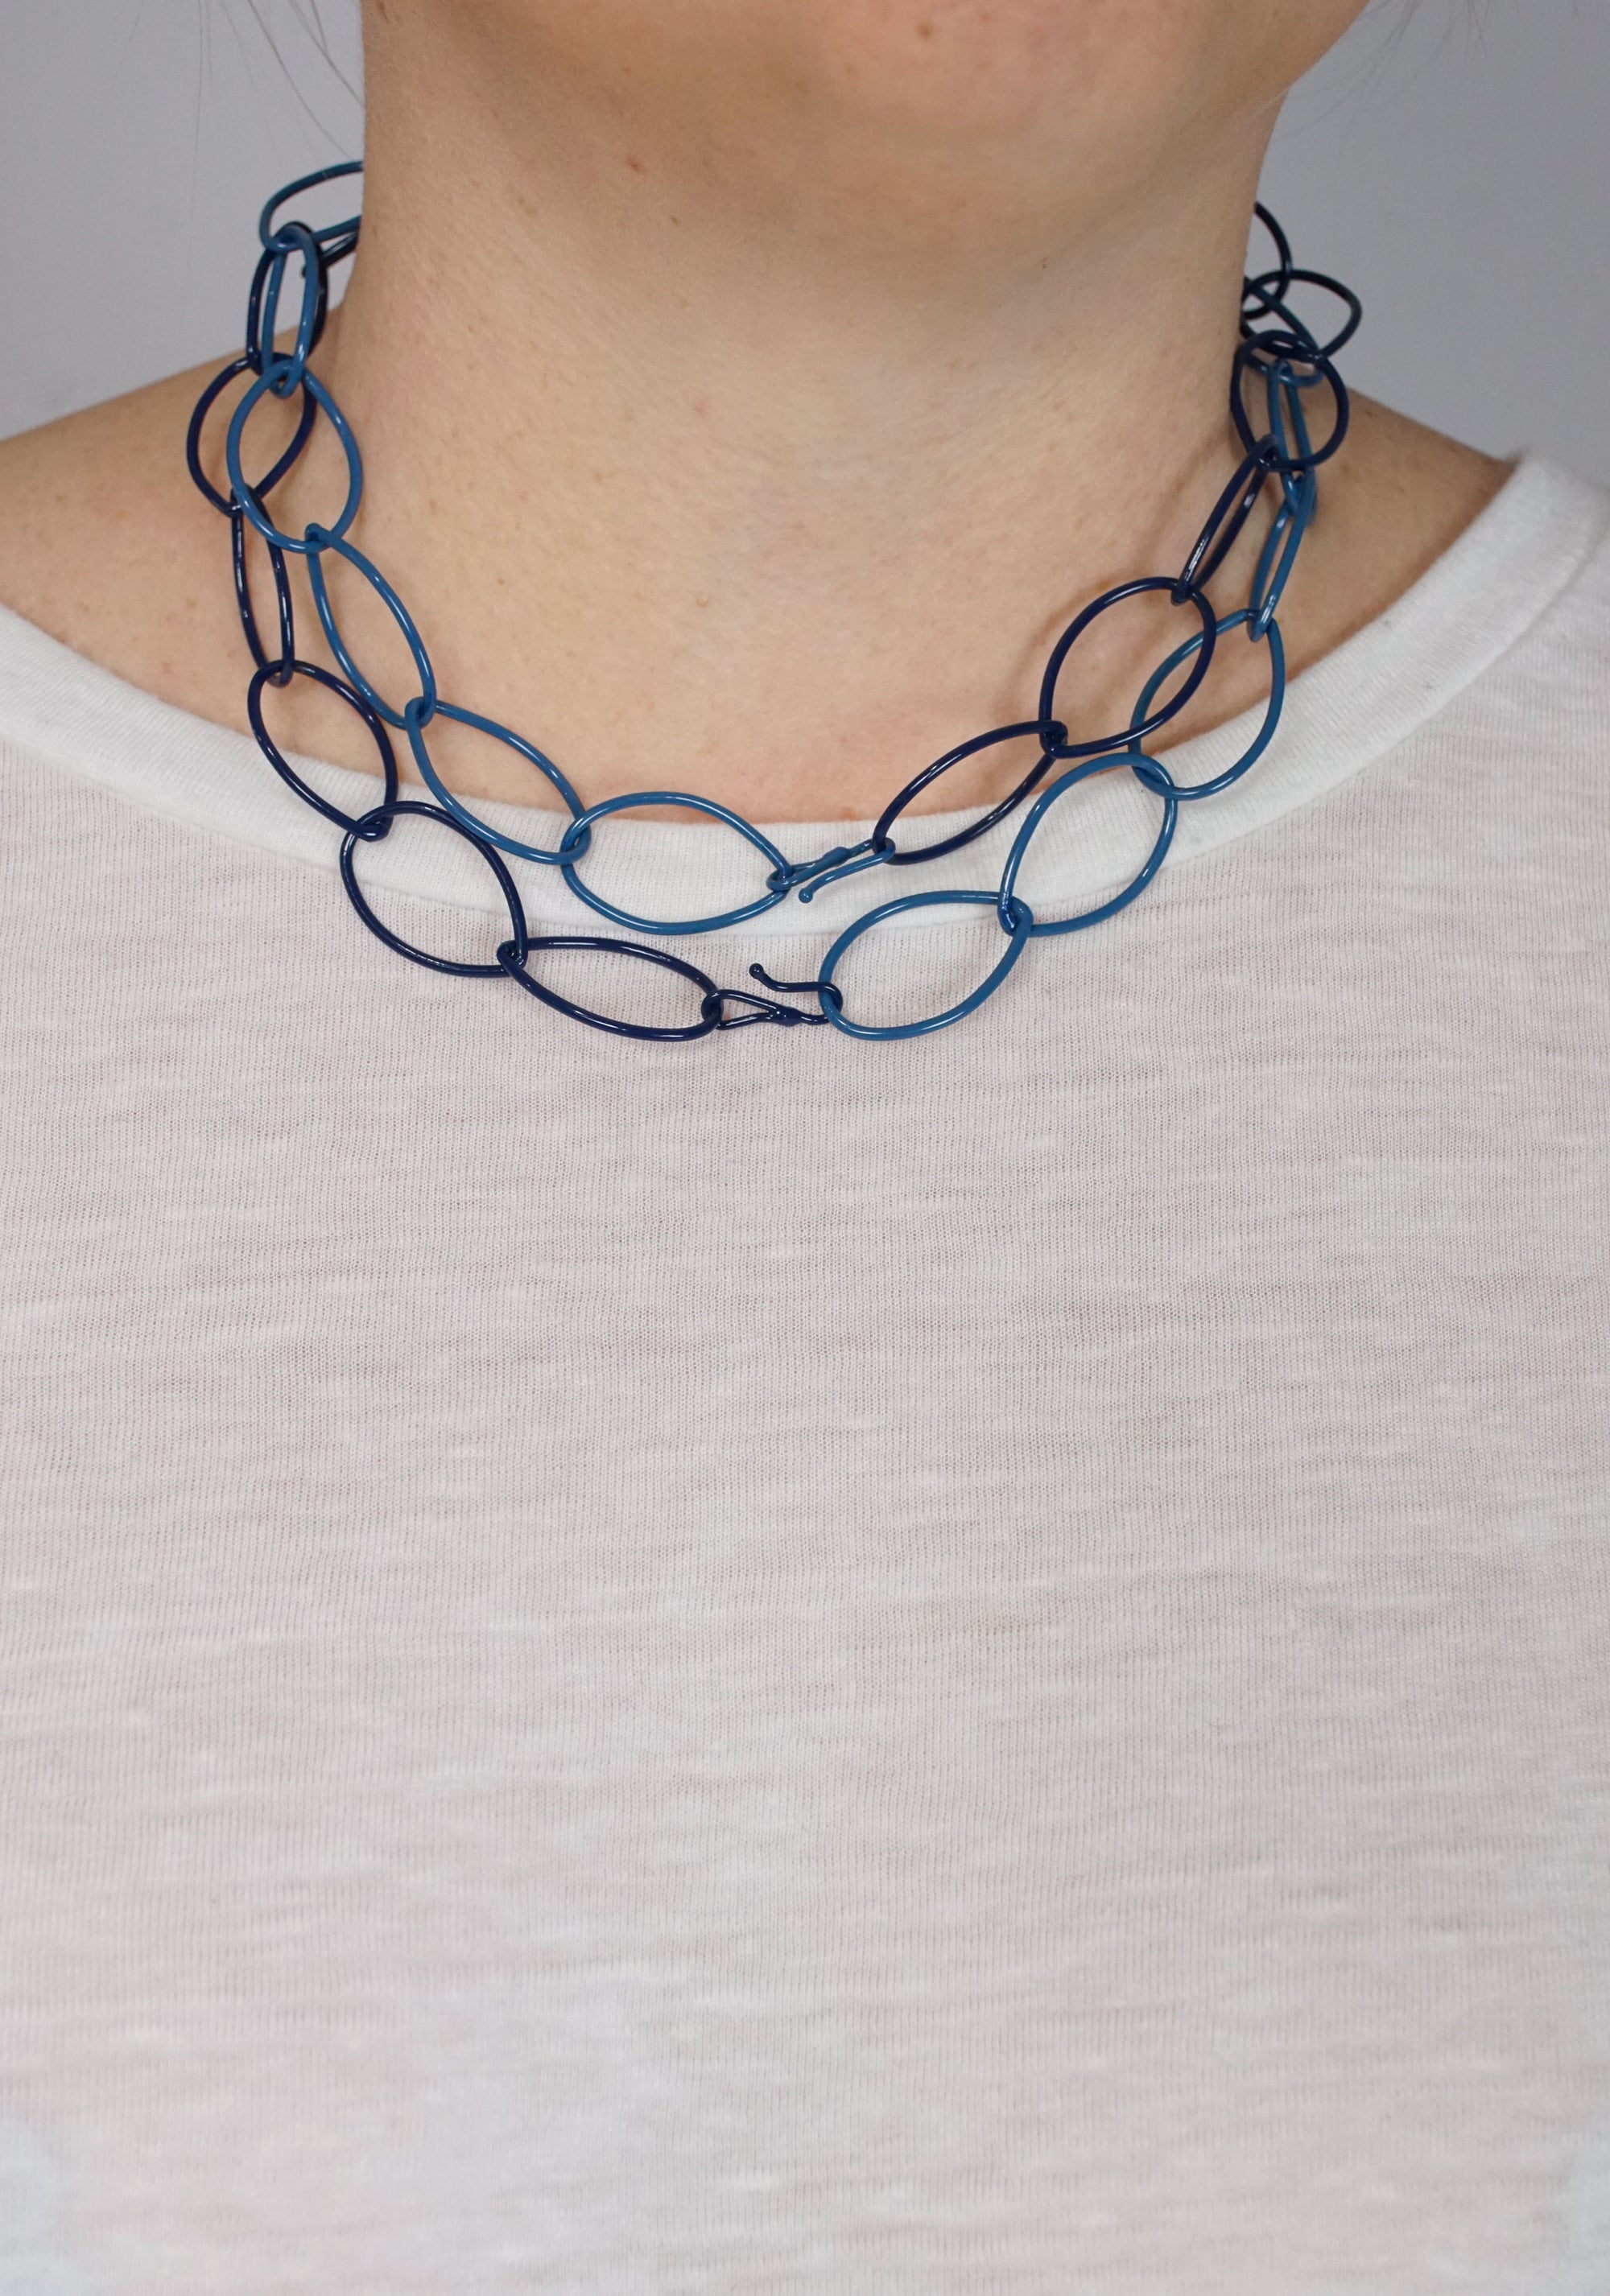 Alice necklace in Azure Blue and Blue Sapphire - sample sale